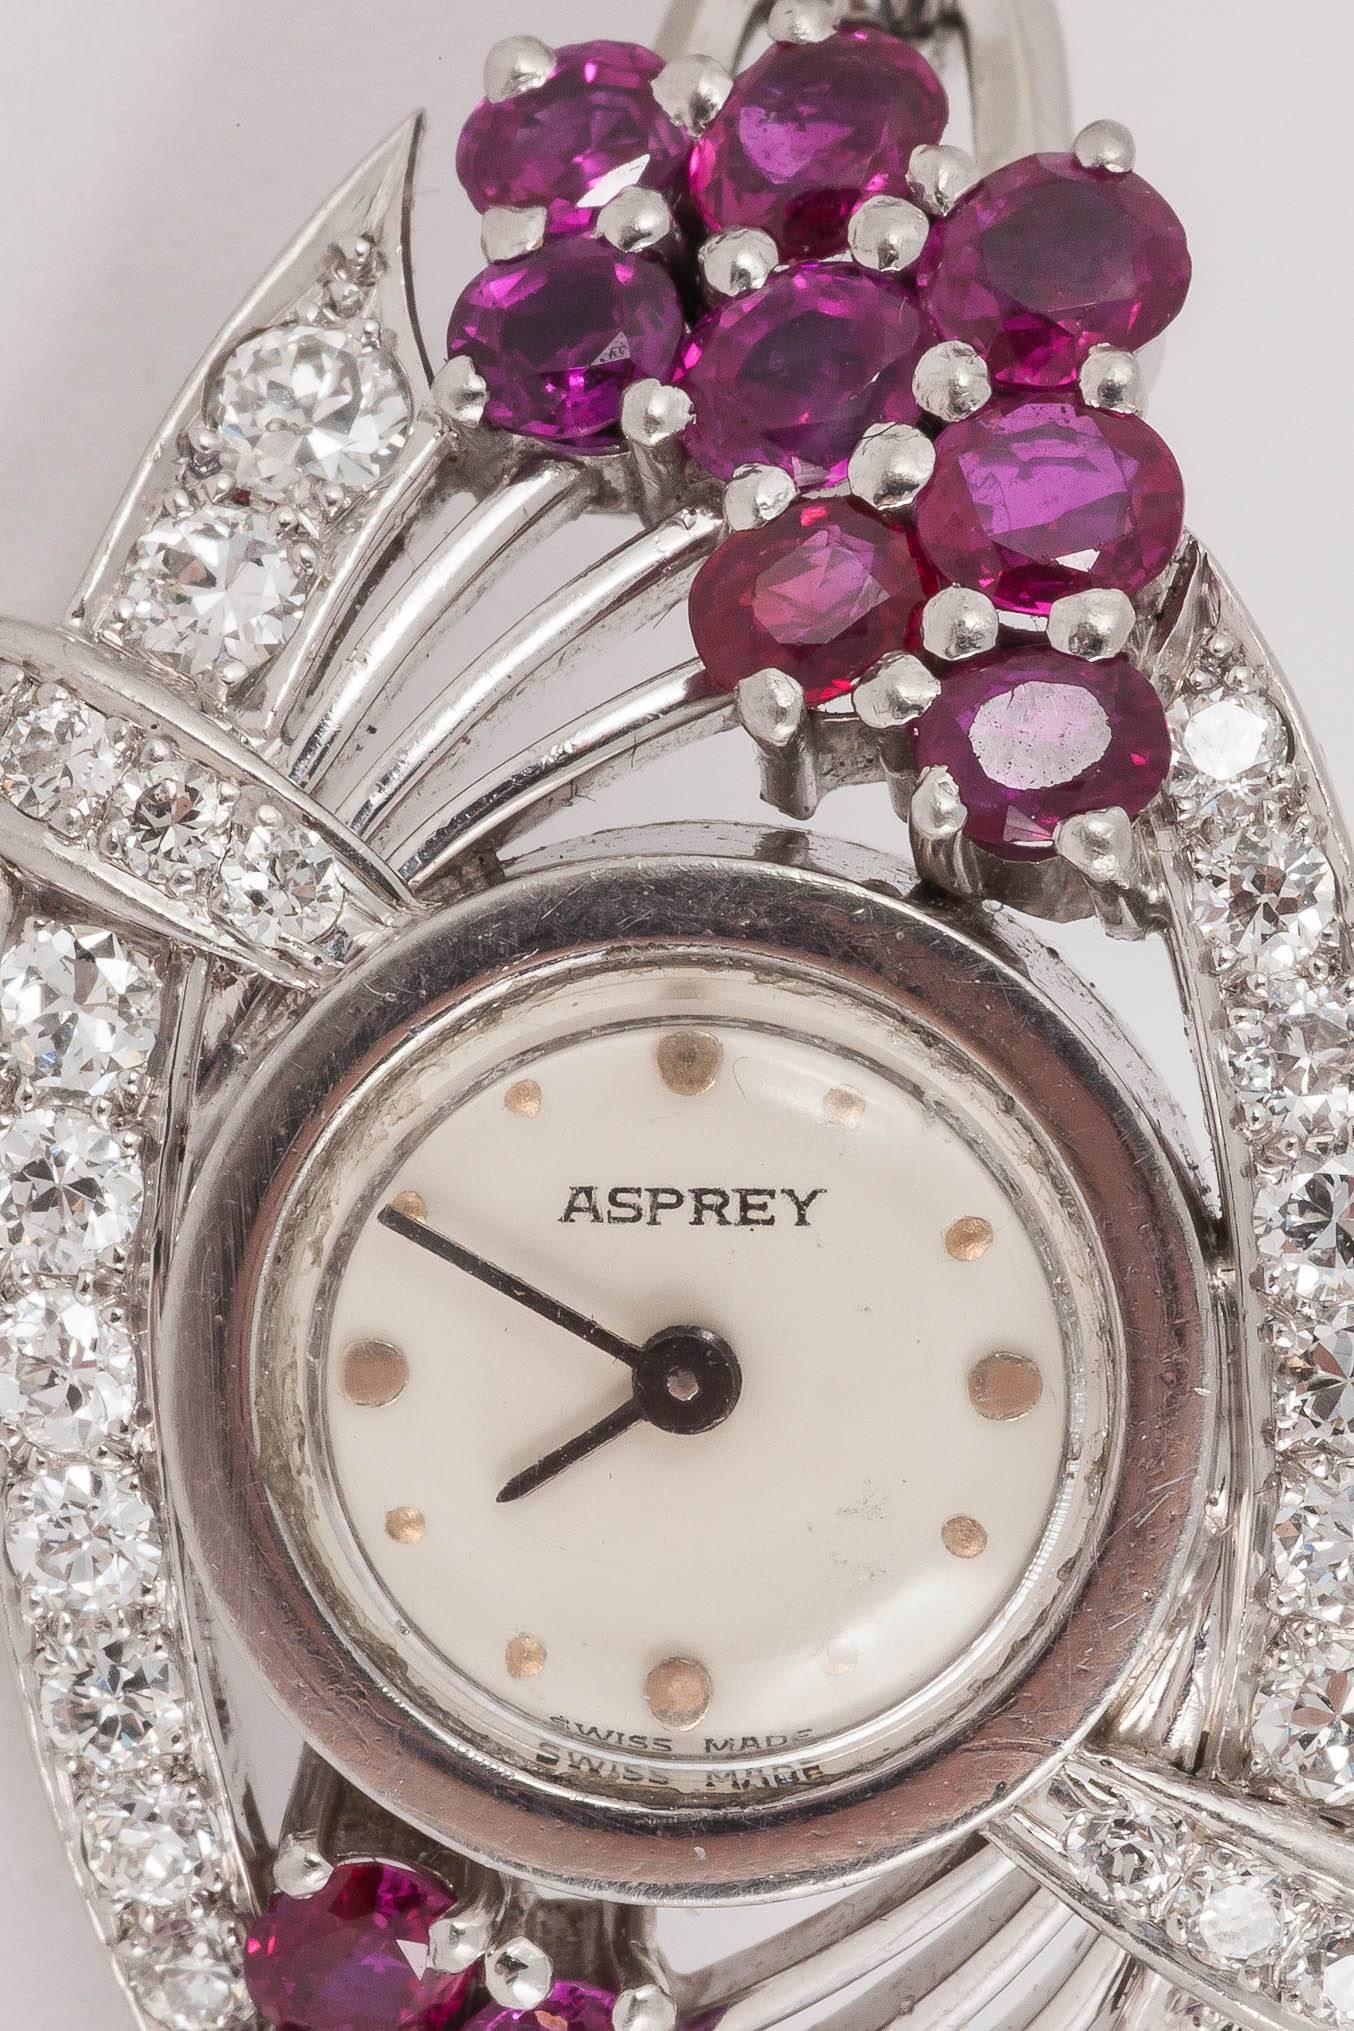 A fine quality ladies evening watch set with rubies and diamonds in 14ct white gold. Twin bracelet and clasp, lever jeweled with a mechanical movement.  Signed Asprey & Co. of London, Circa 1950-60.